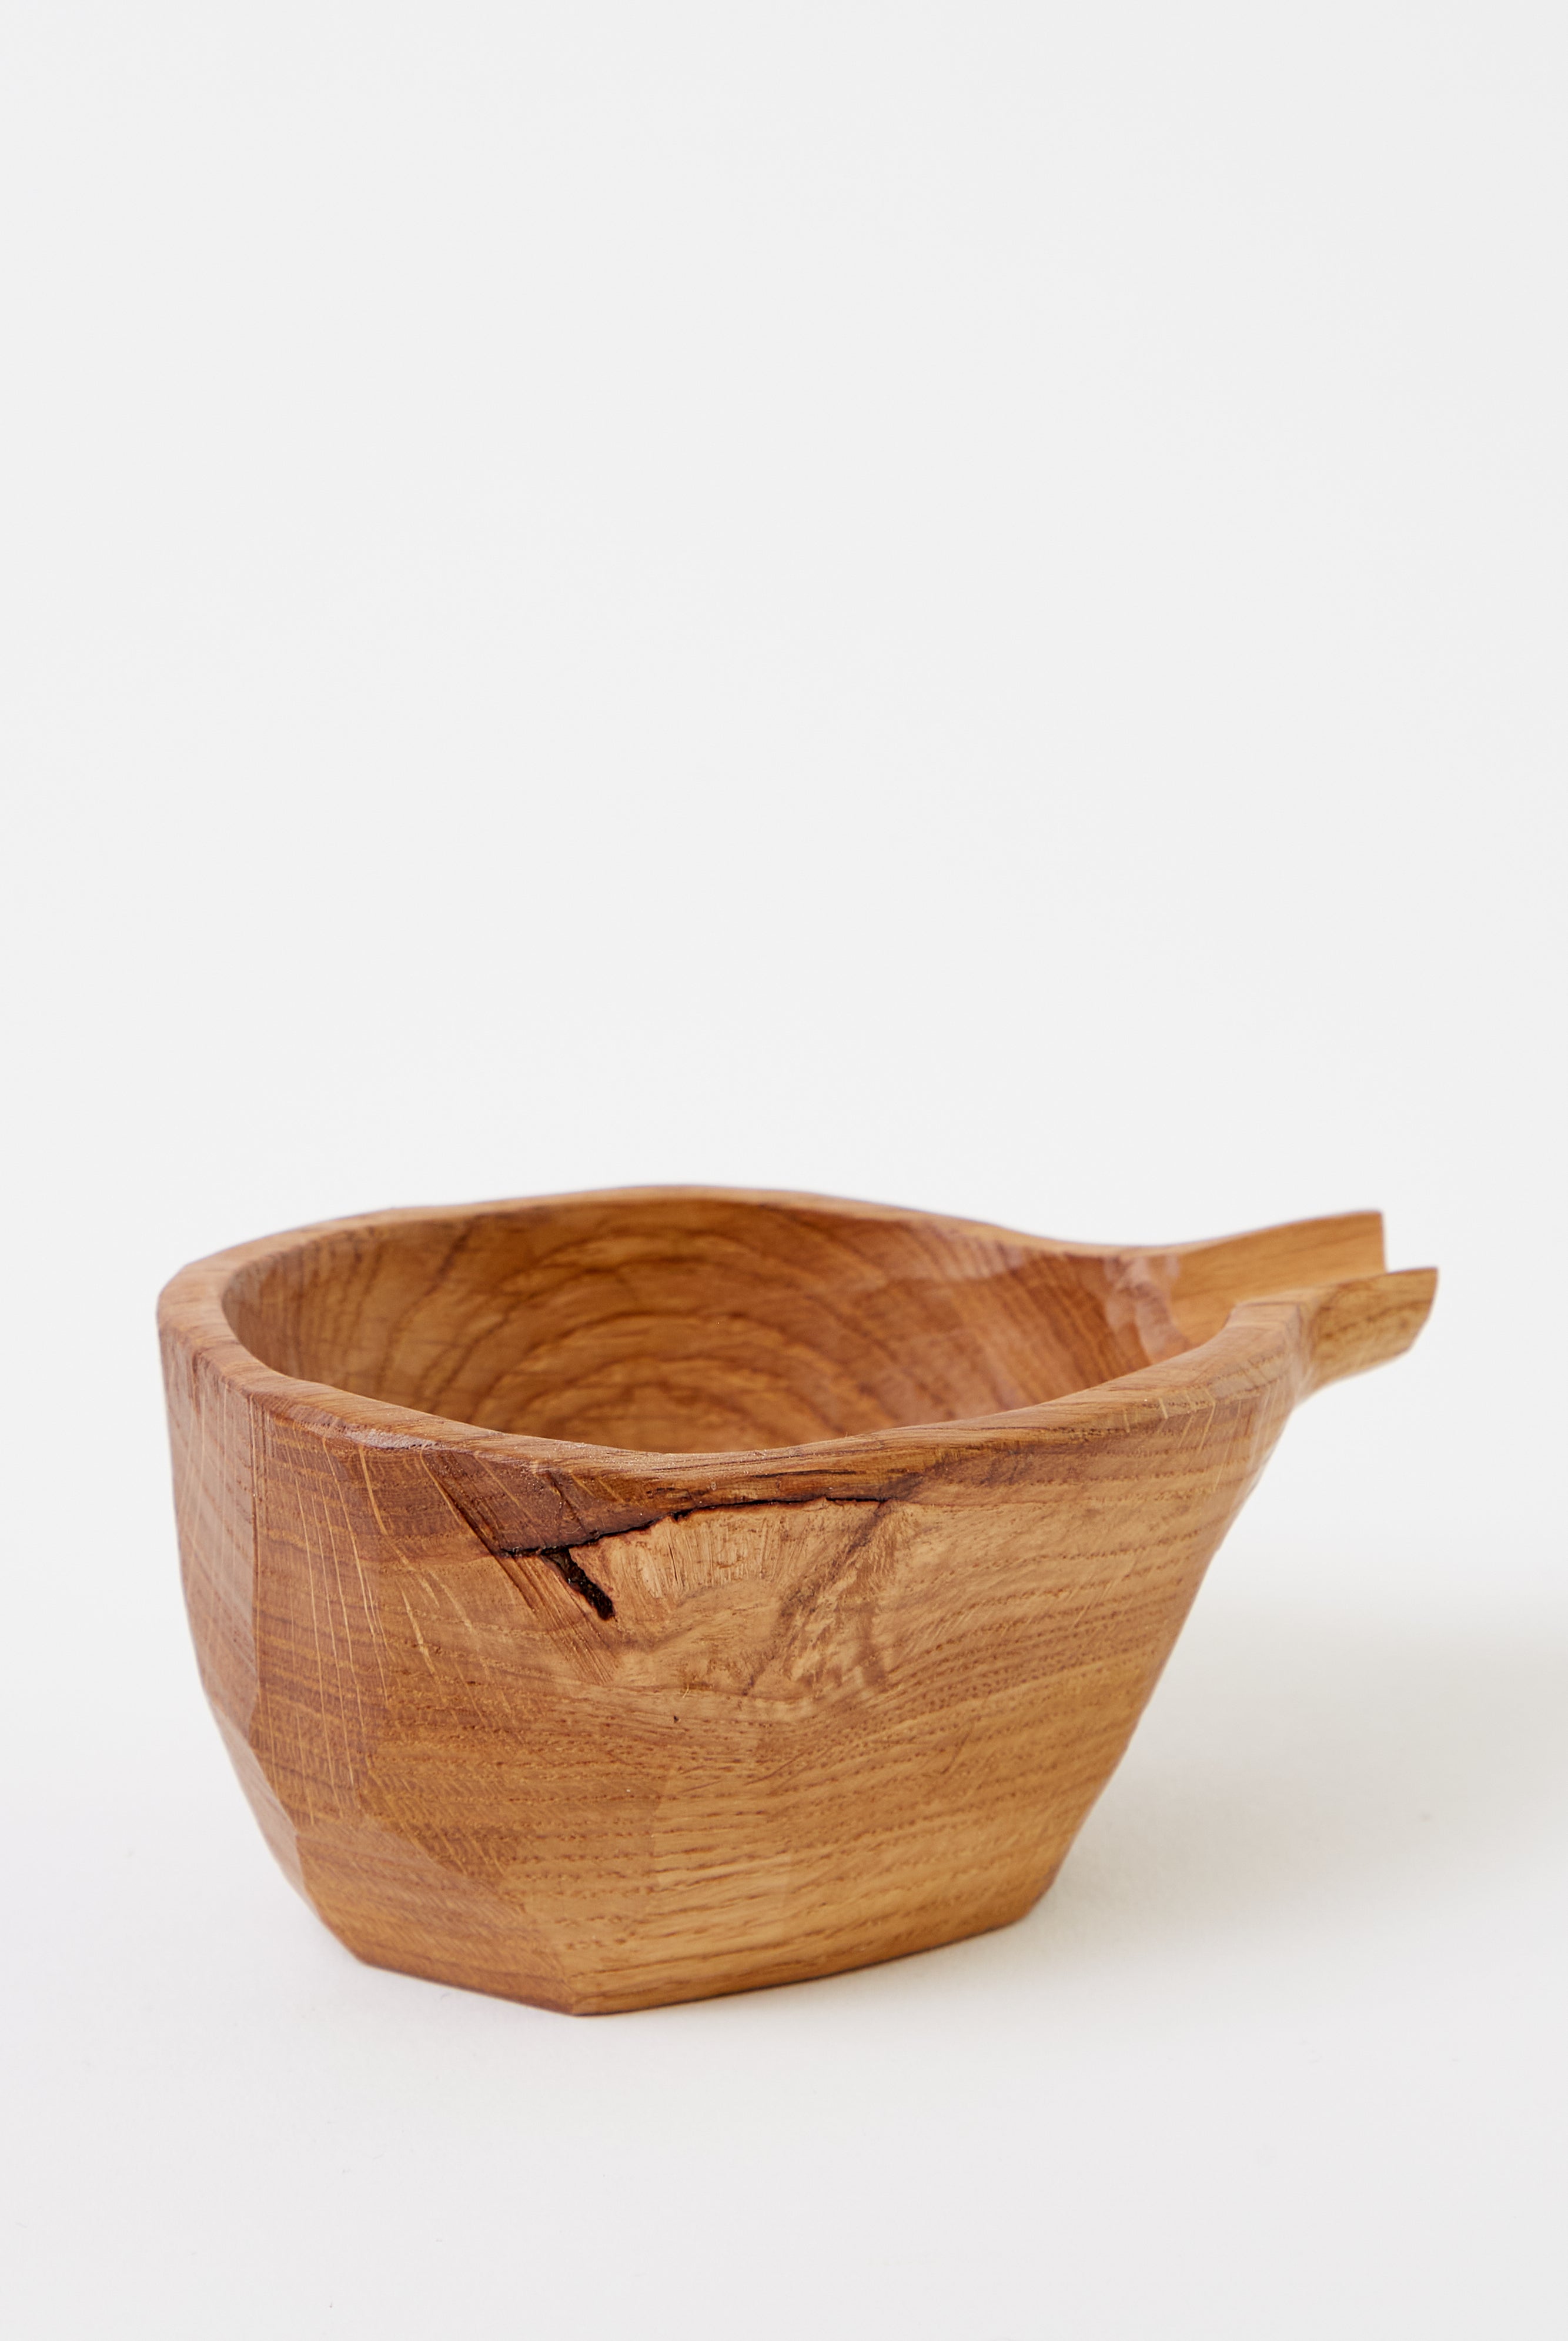 Alex Walshaw Small Pouring Bowl in Reclaimed Wood